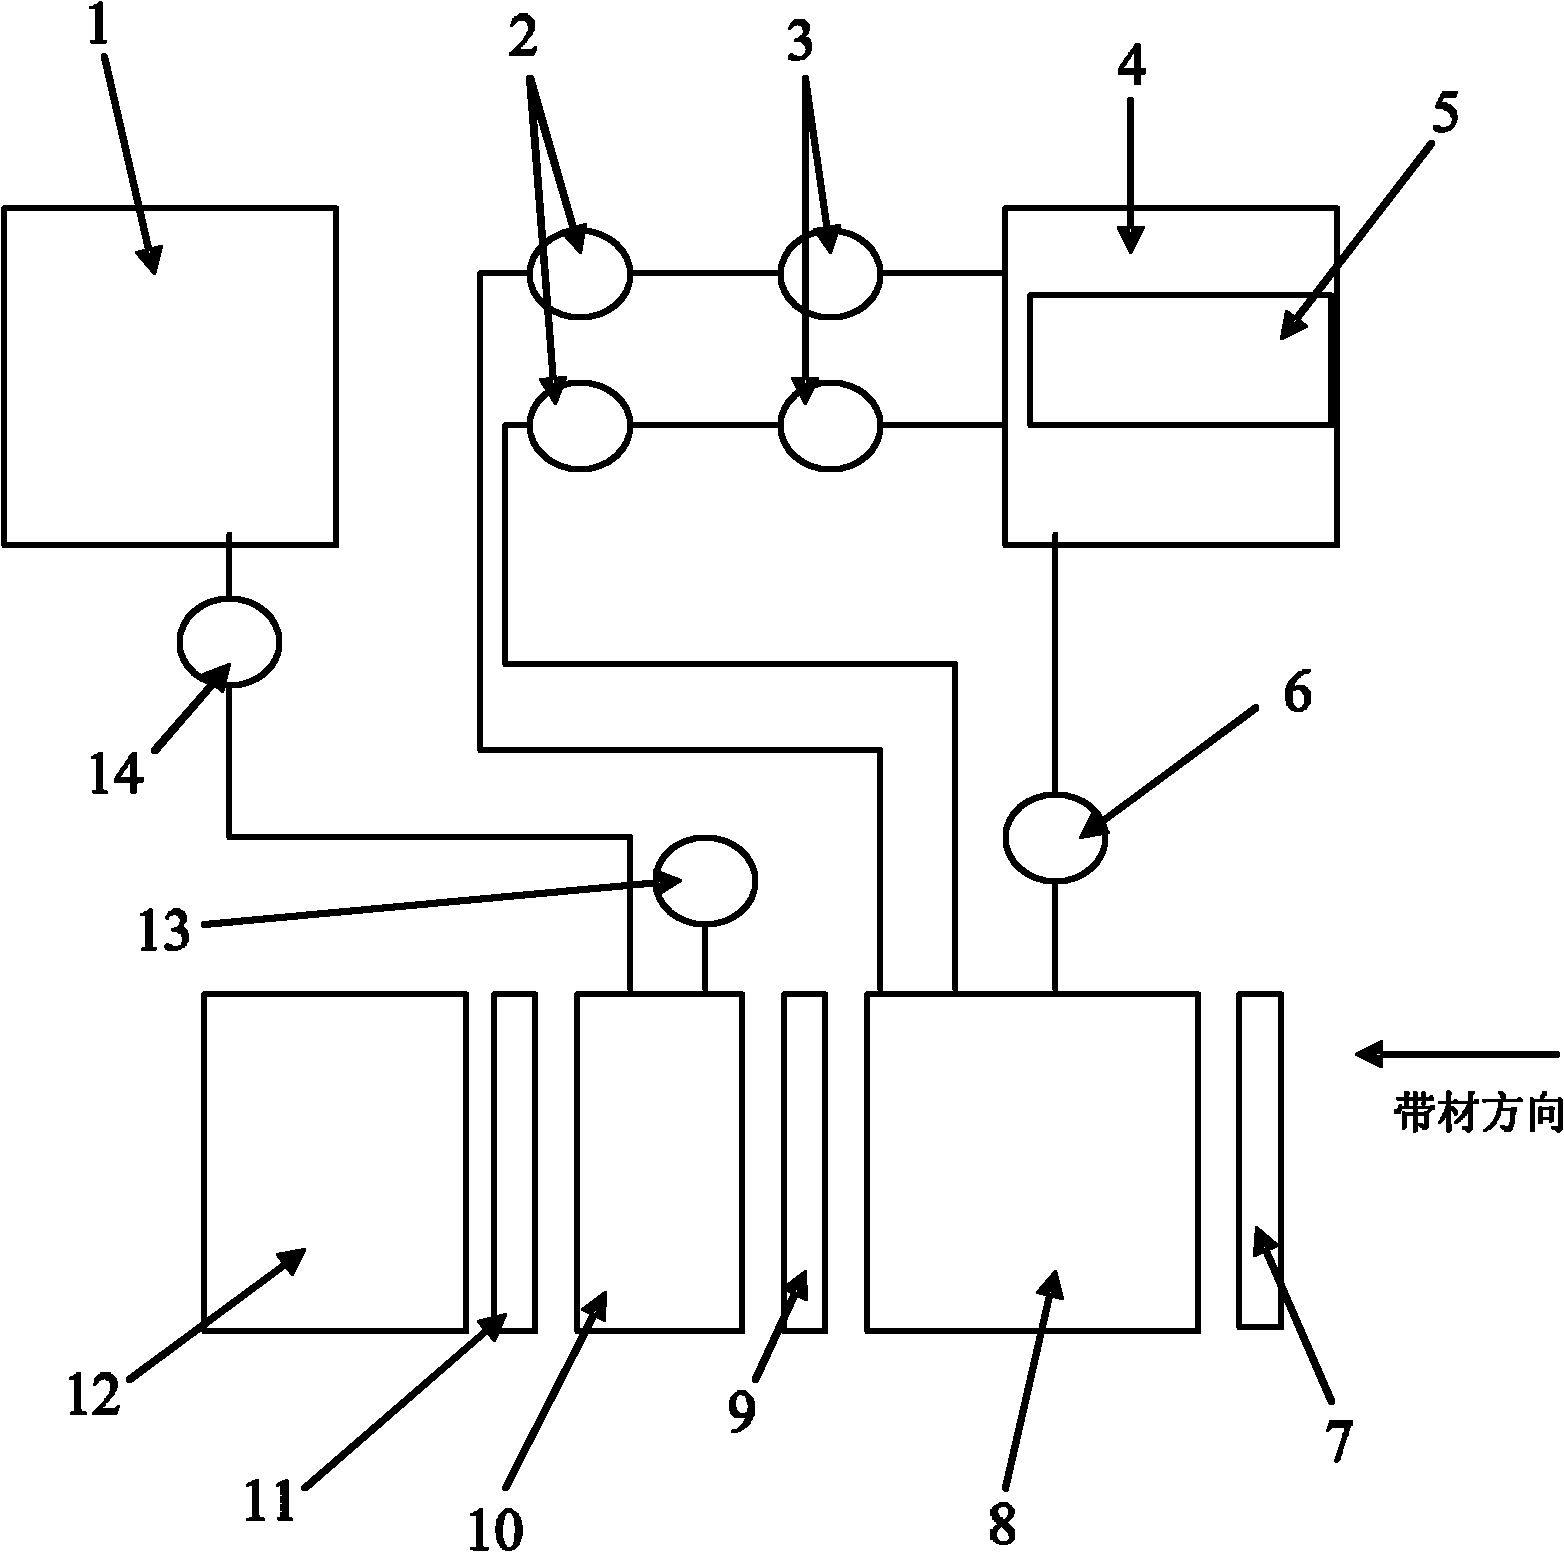 Withdrawal and straightening unit line cleaning system